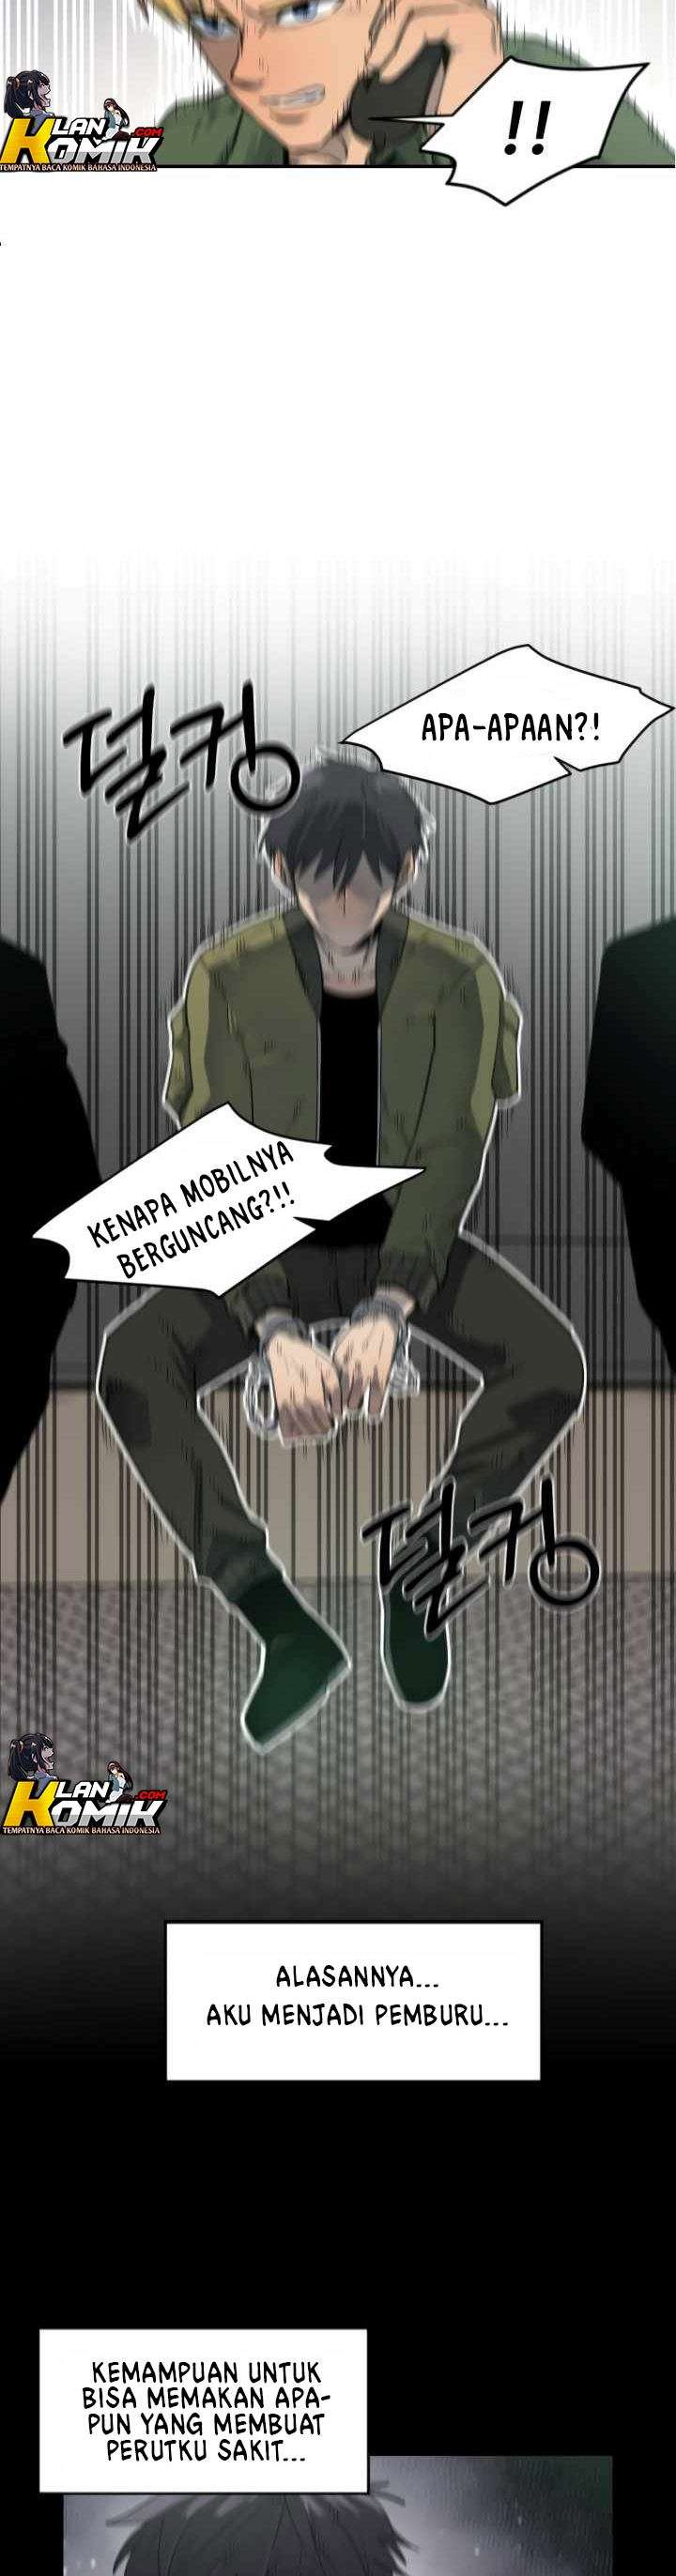 Spoiler Manhwa I Grow Stronger By Eating! 2